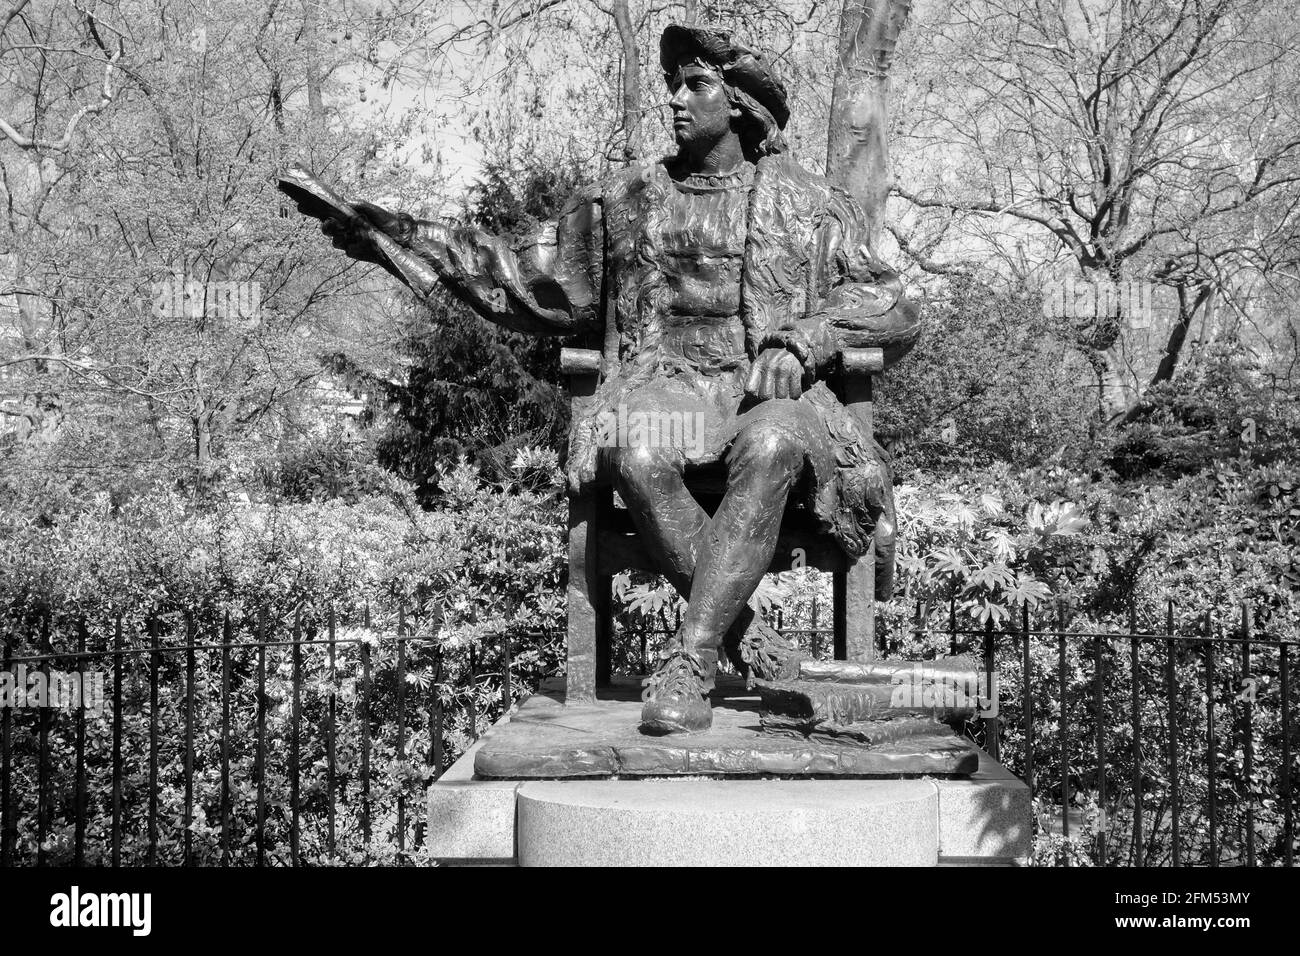 Statue of Christopher Columbus, Belgrave Square Gardens, Belgravia, City of Westminster, Greater London, England, United Kingdom. Stock Photo